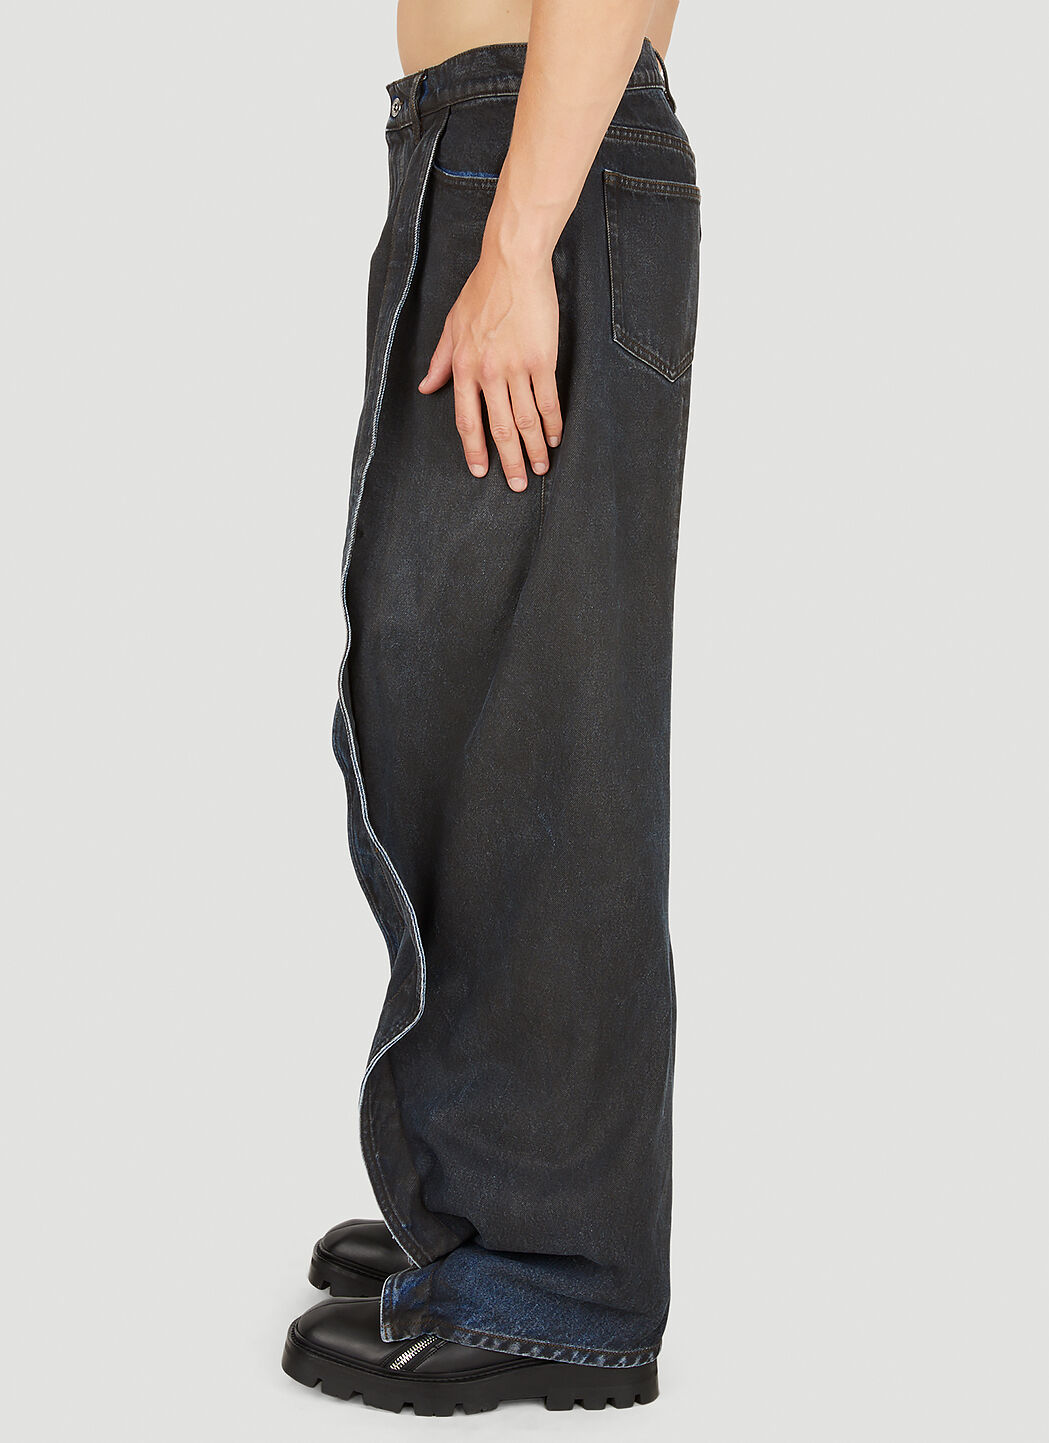 Y/Project Banana Jeans in Black | LN-CC